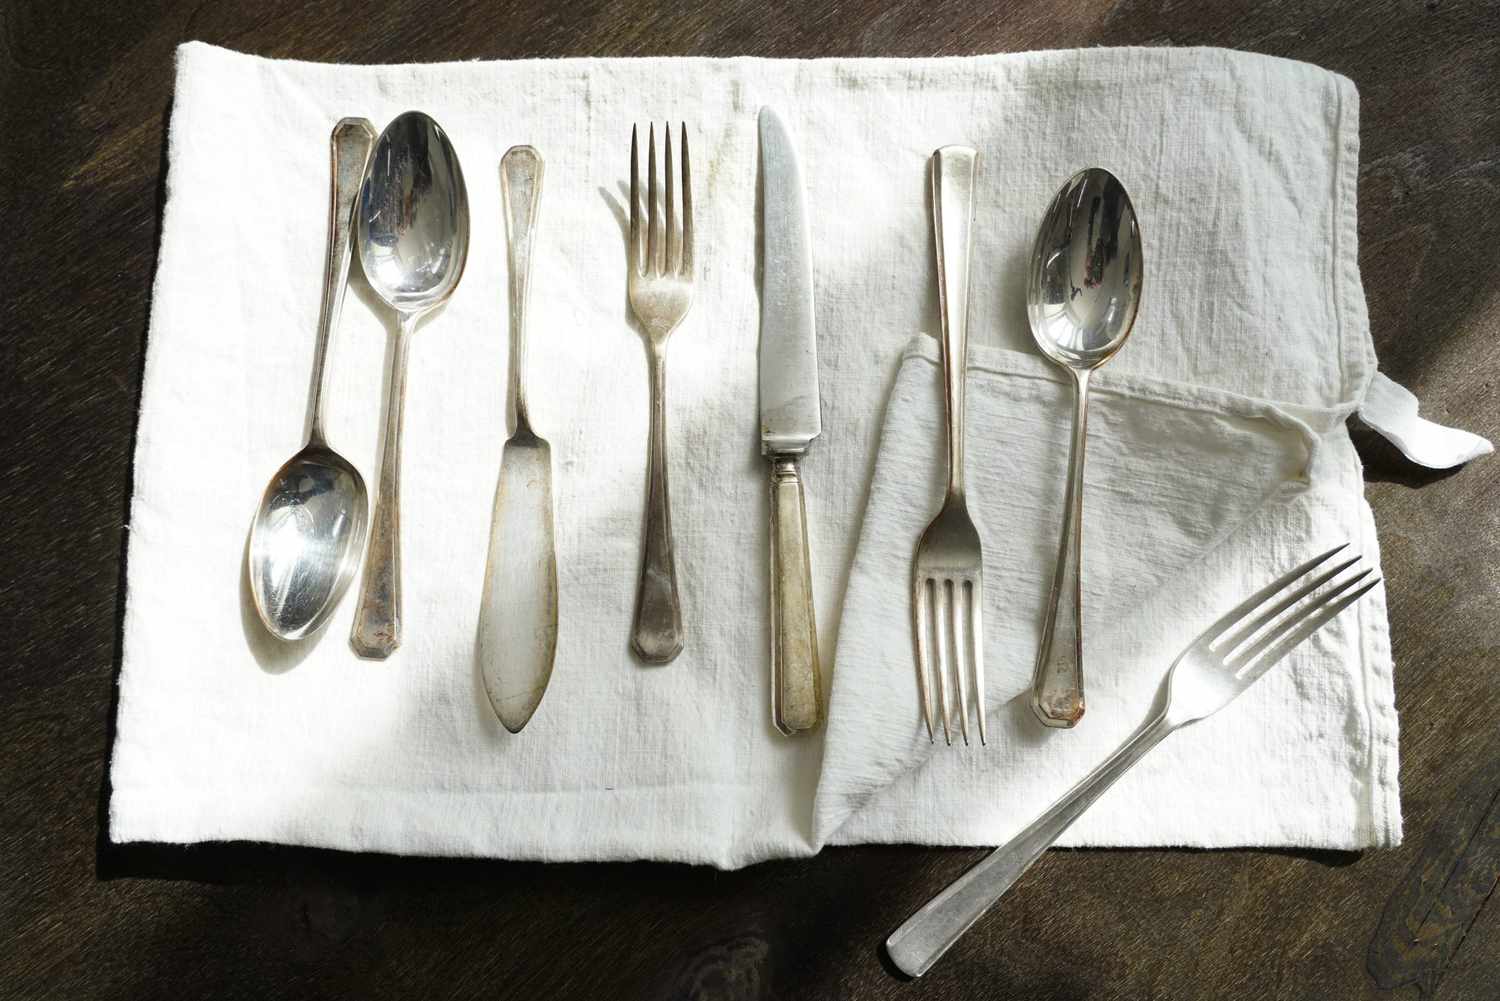 Set of Vintage English Silver Cutlery over an Old Linen Cloth and a Dark Wooden Background. Top View